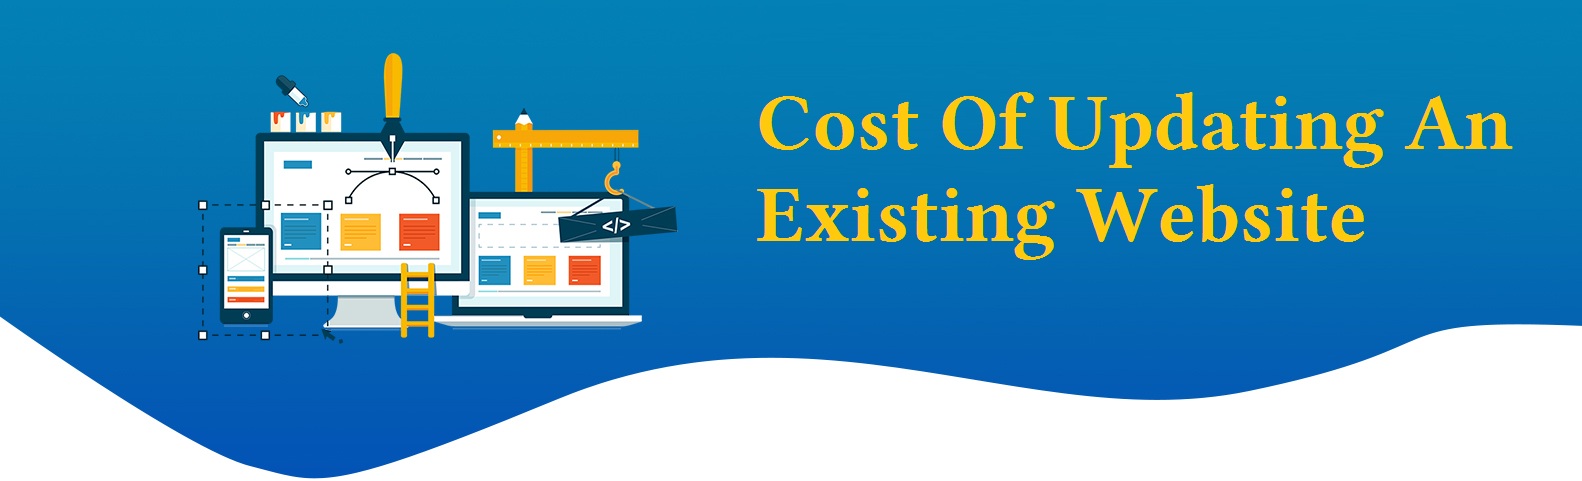 Cost of Updating an Existing Website